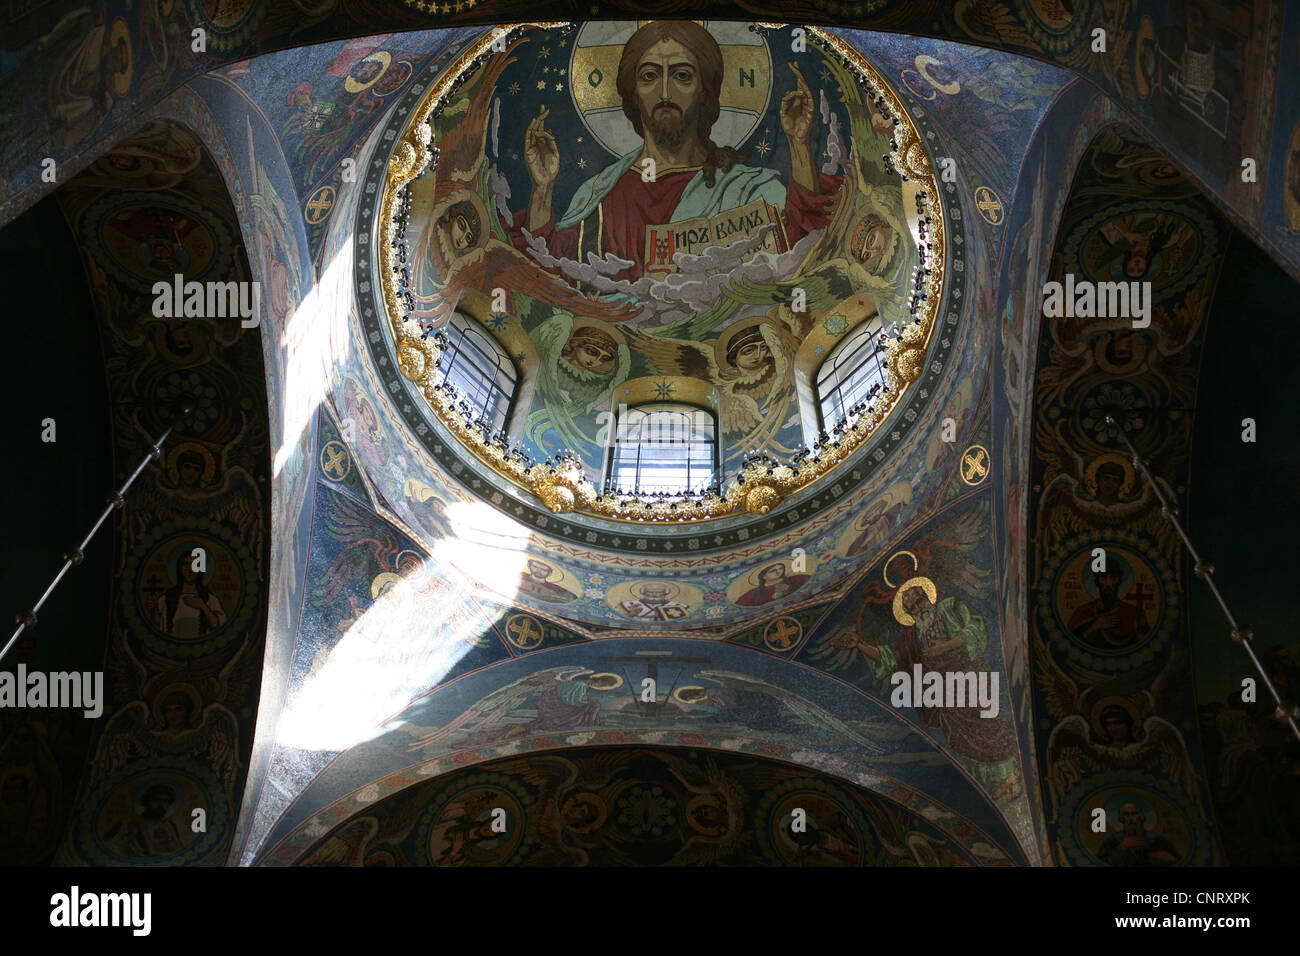 Mosaics in the Church of the Saviour on Blood in St Petersburg, Russia. Stock Photo